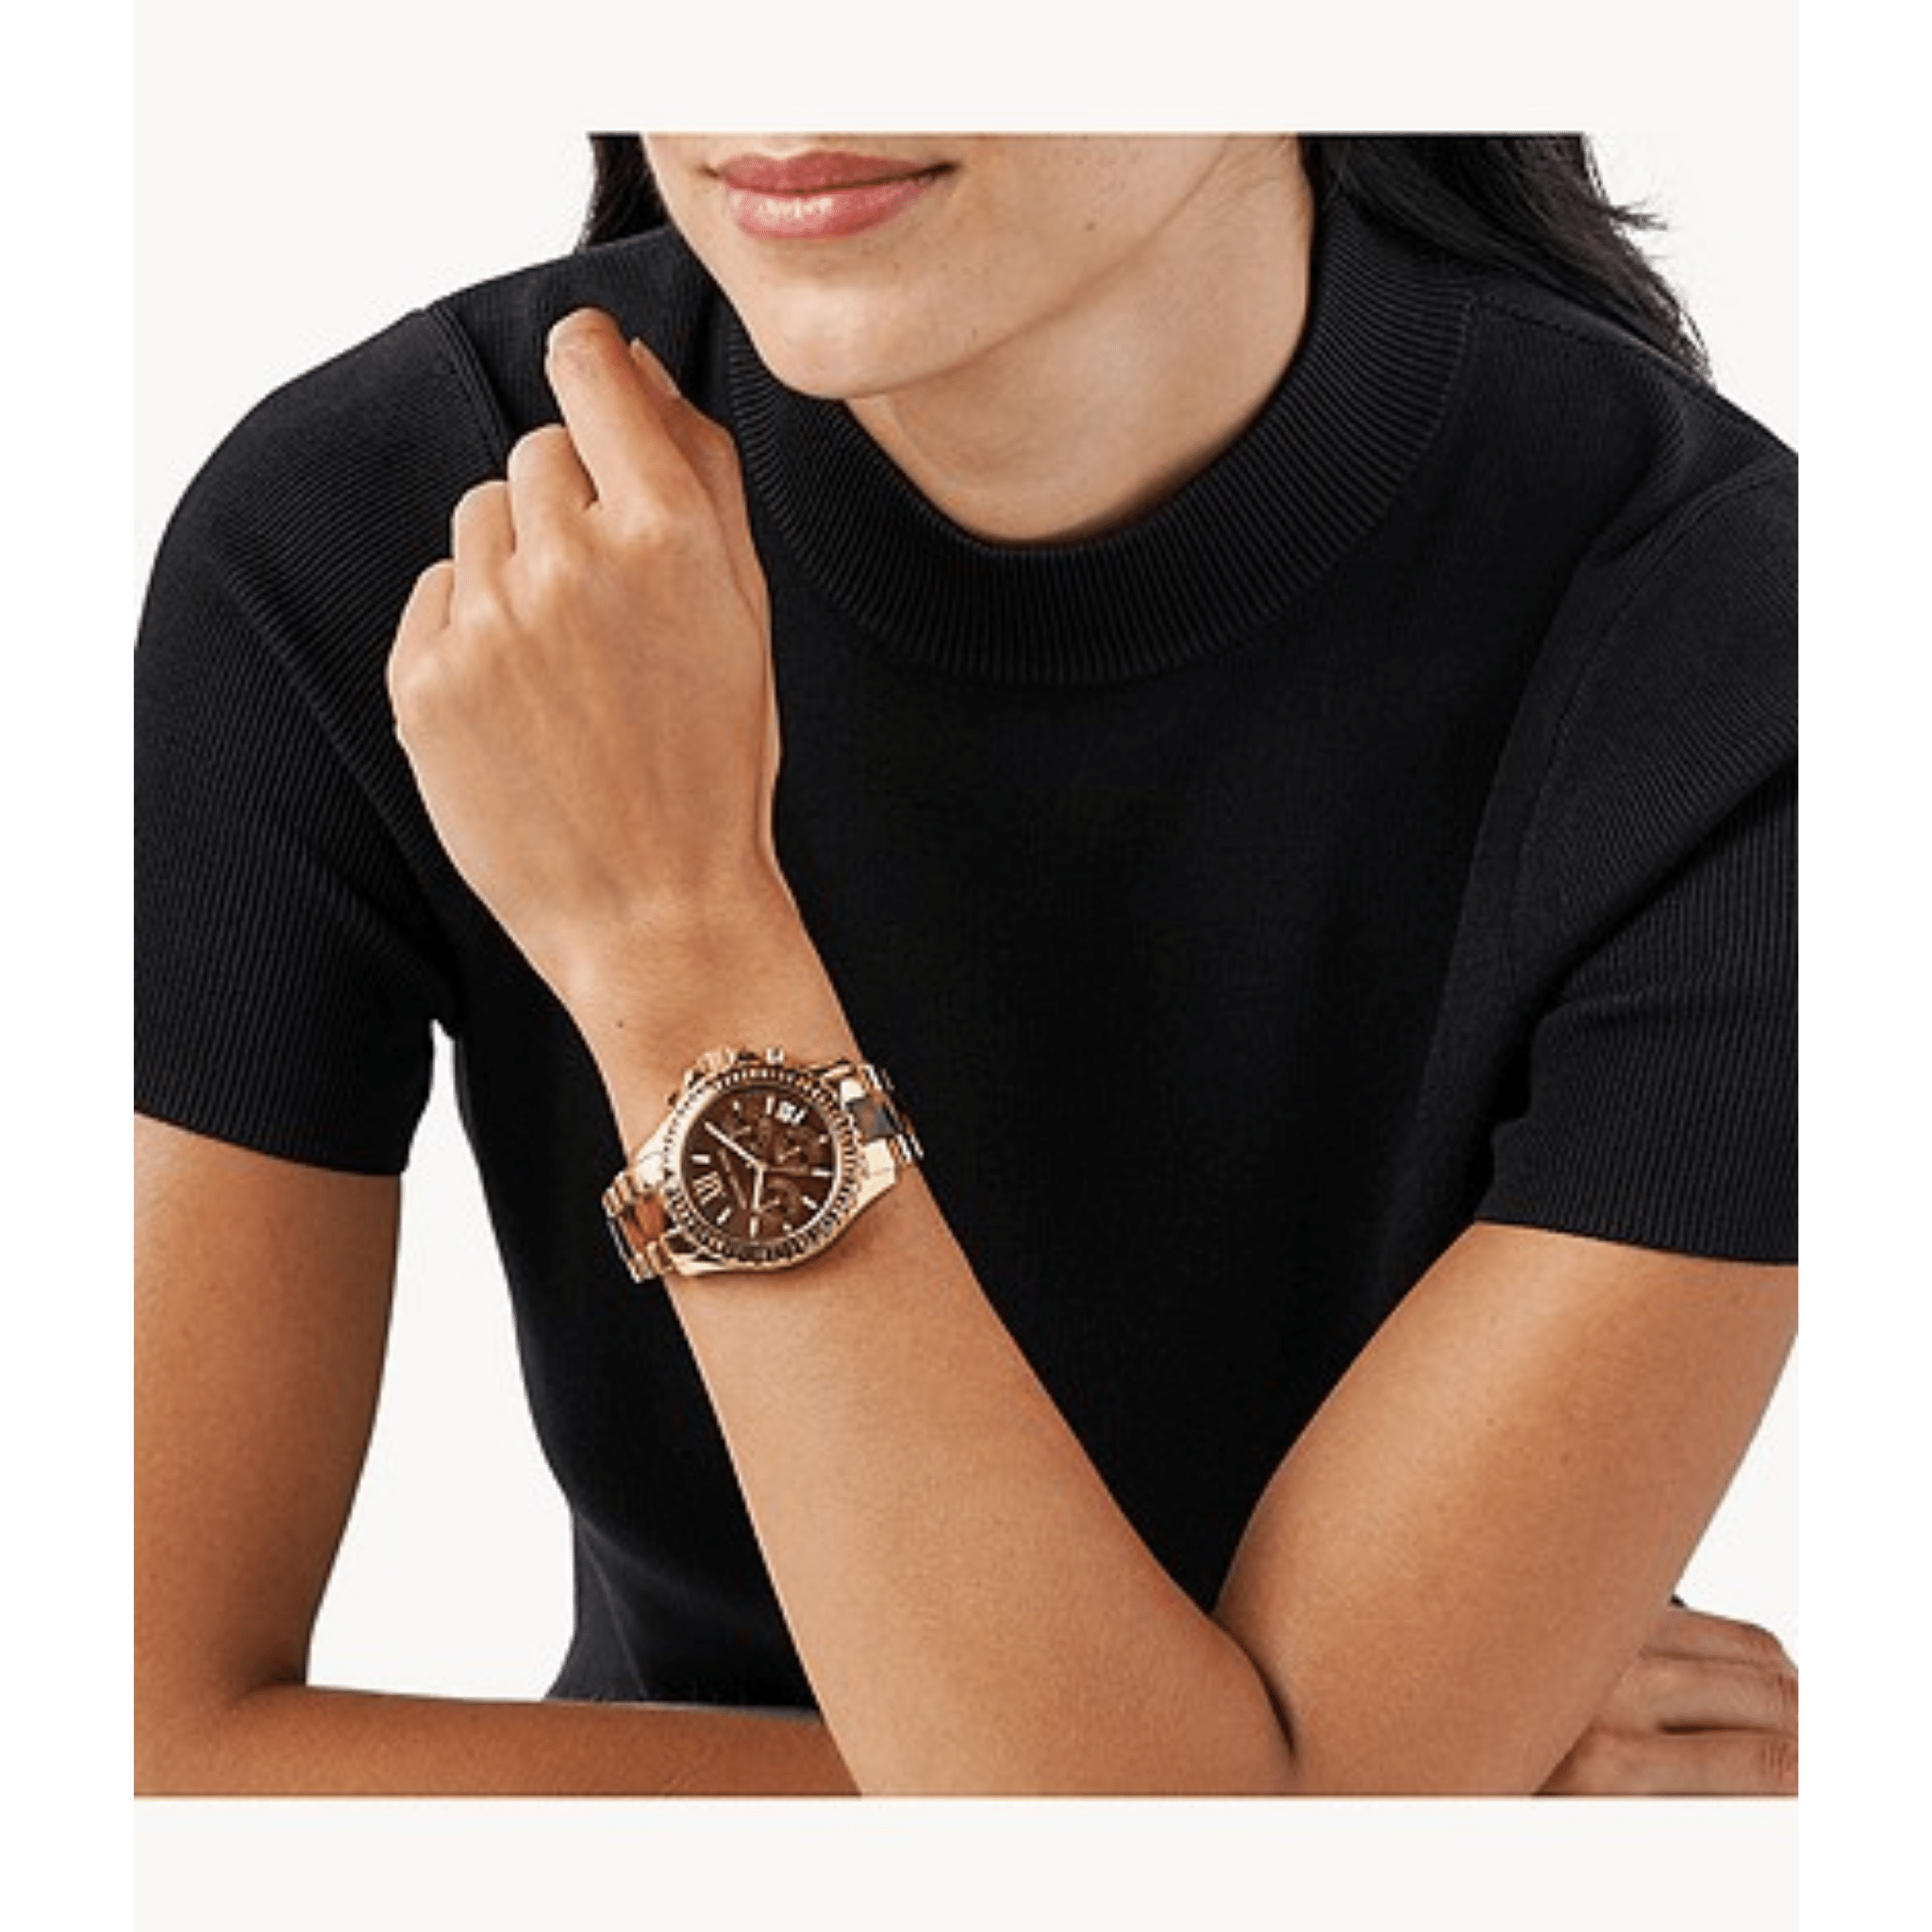 Everts Chronograph Crystal Brown Women's